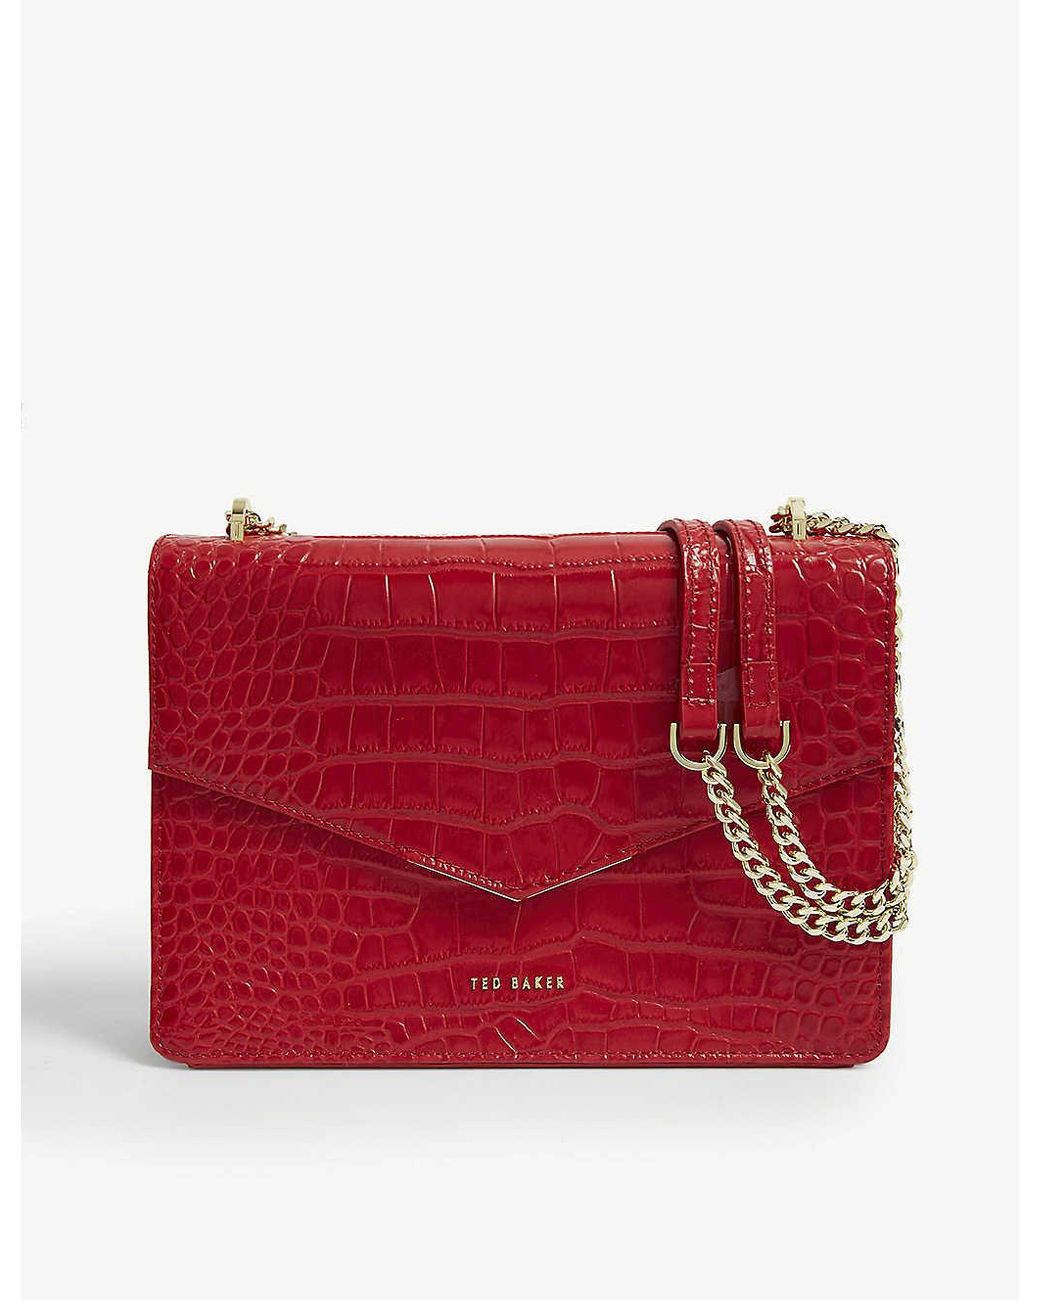 Ted Baker Leather Chain Linked Crossbody bag - Red Crossbody Bags, Handbags  - W3B74094 | The RealReal